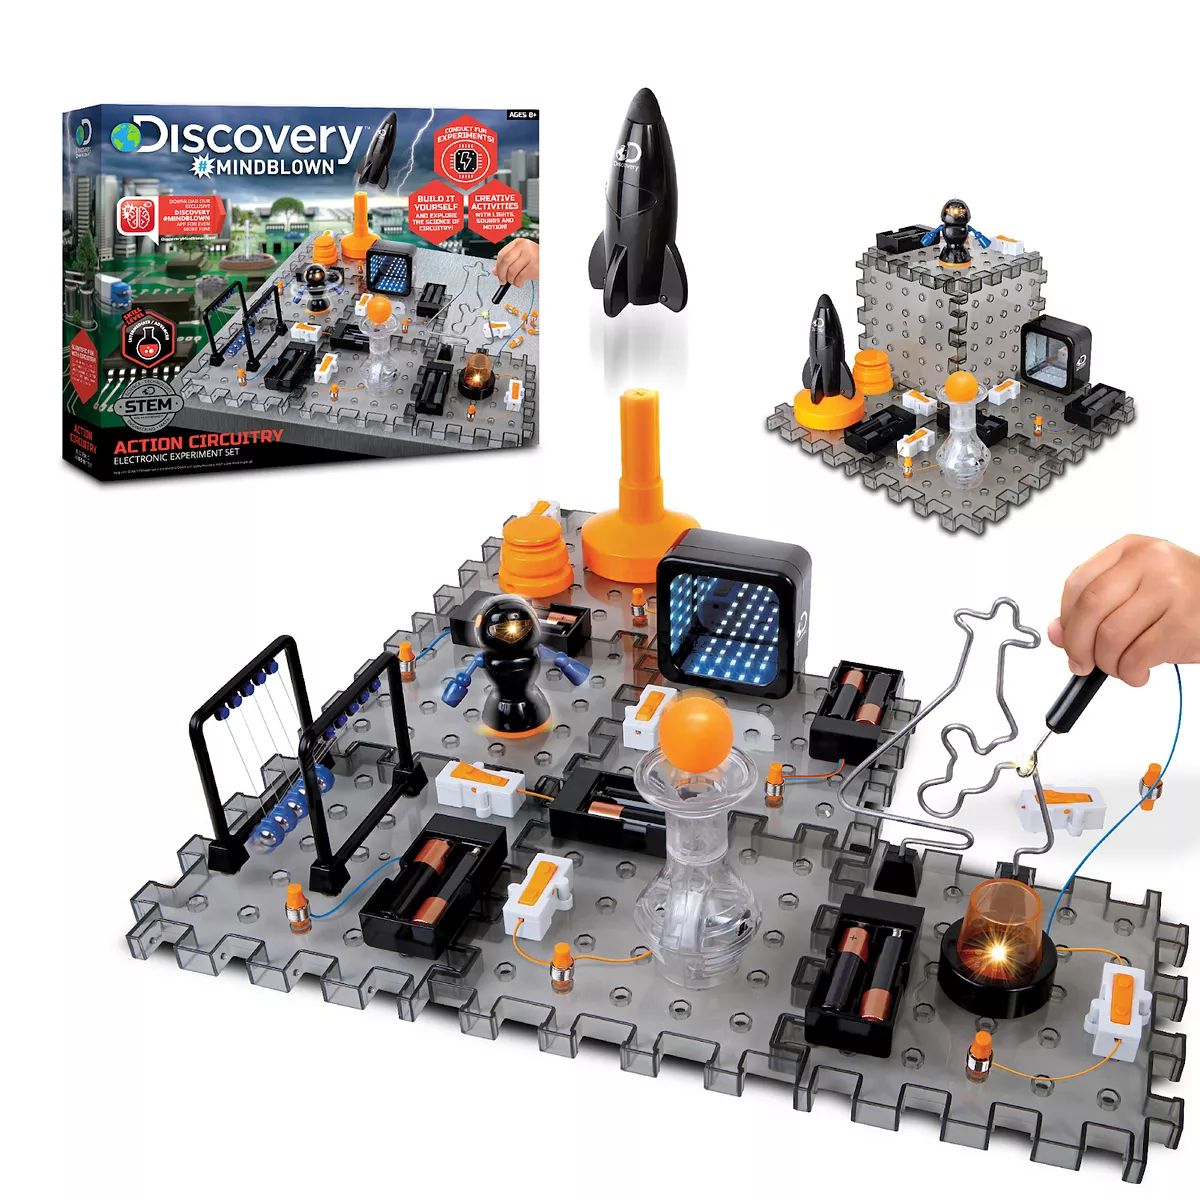 Discovery #Mindblown STEM Electronic Circuitry Experiment Building Set | Kohl's